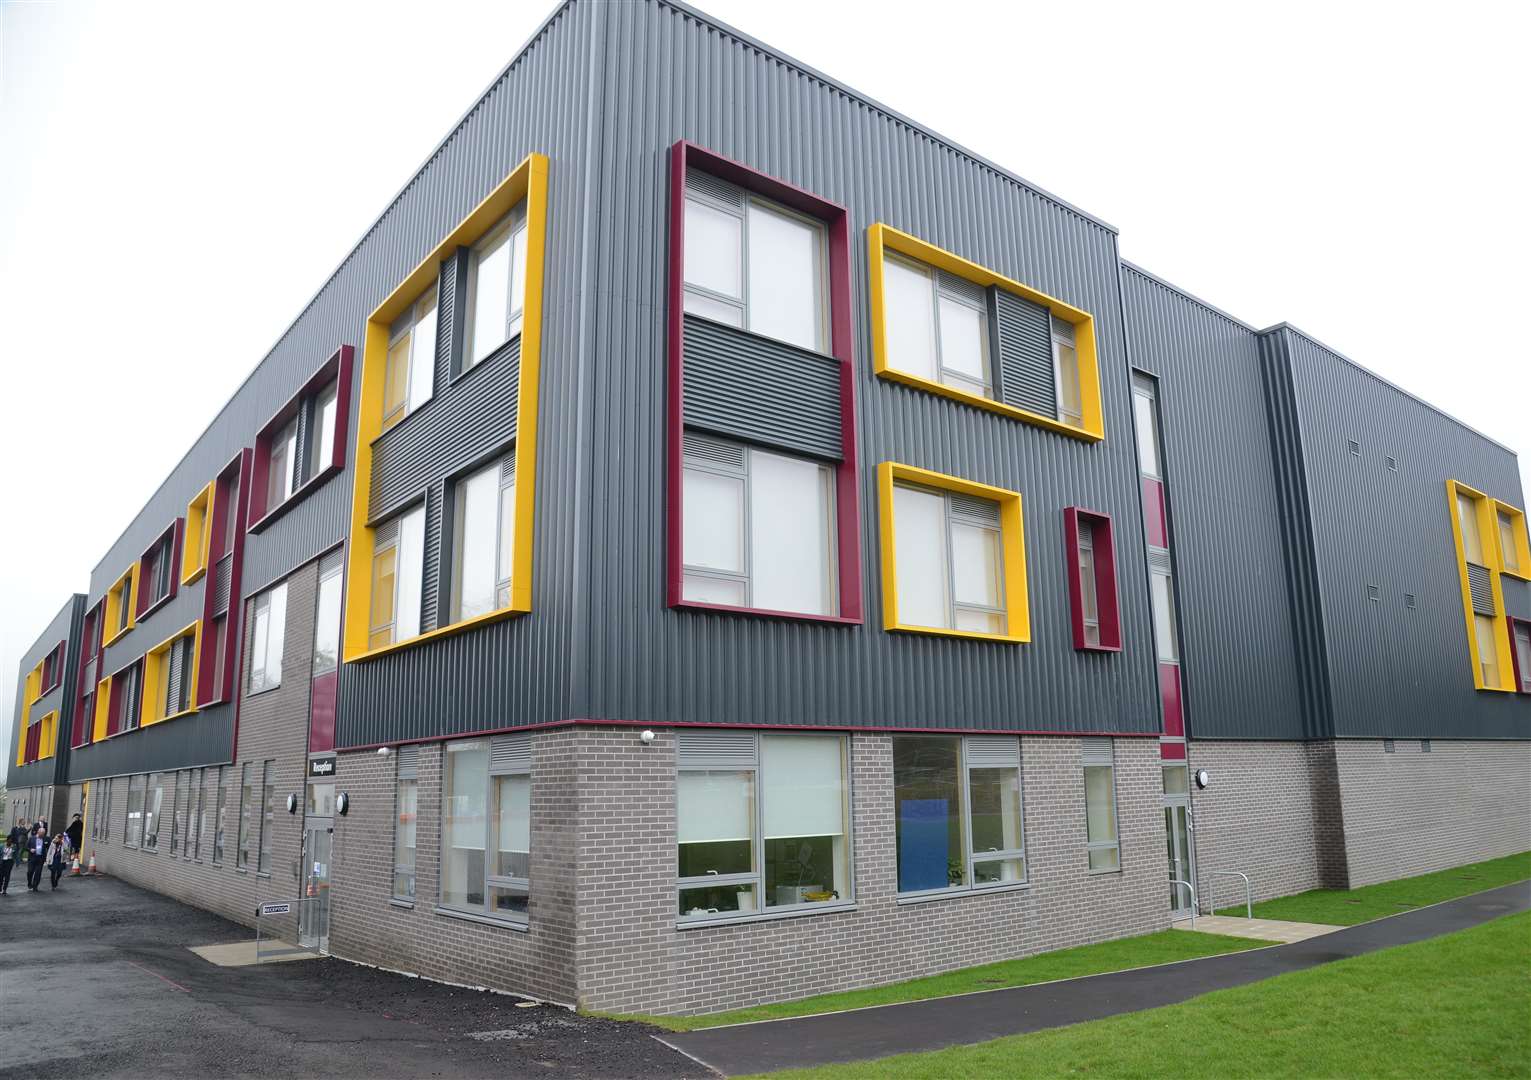 The new building at Meopham School opened in 2018 but more room is already needed. Picture: Gary Browne.